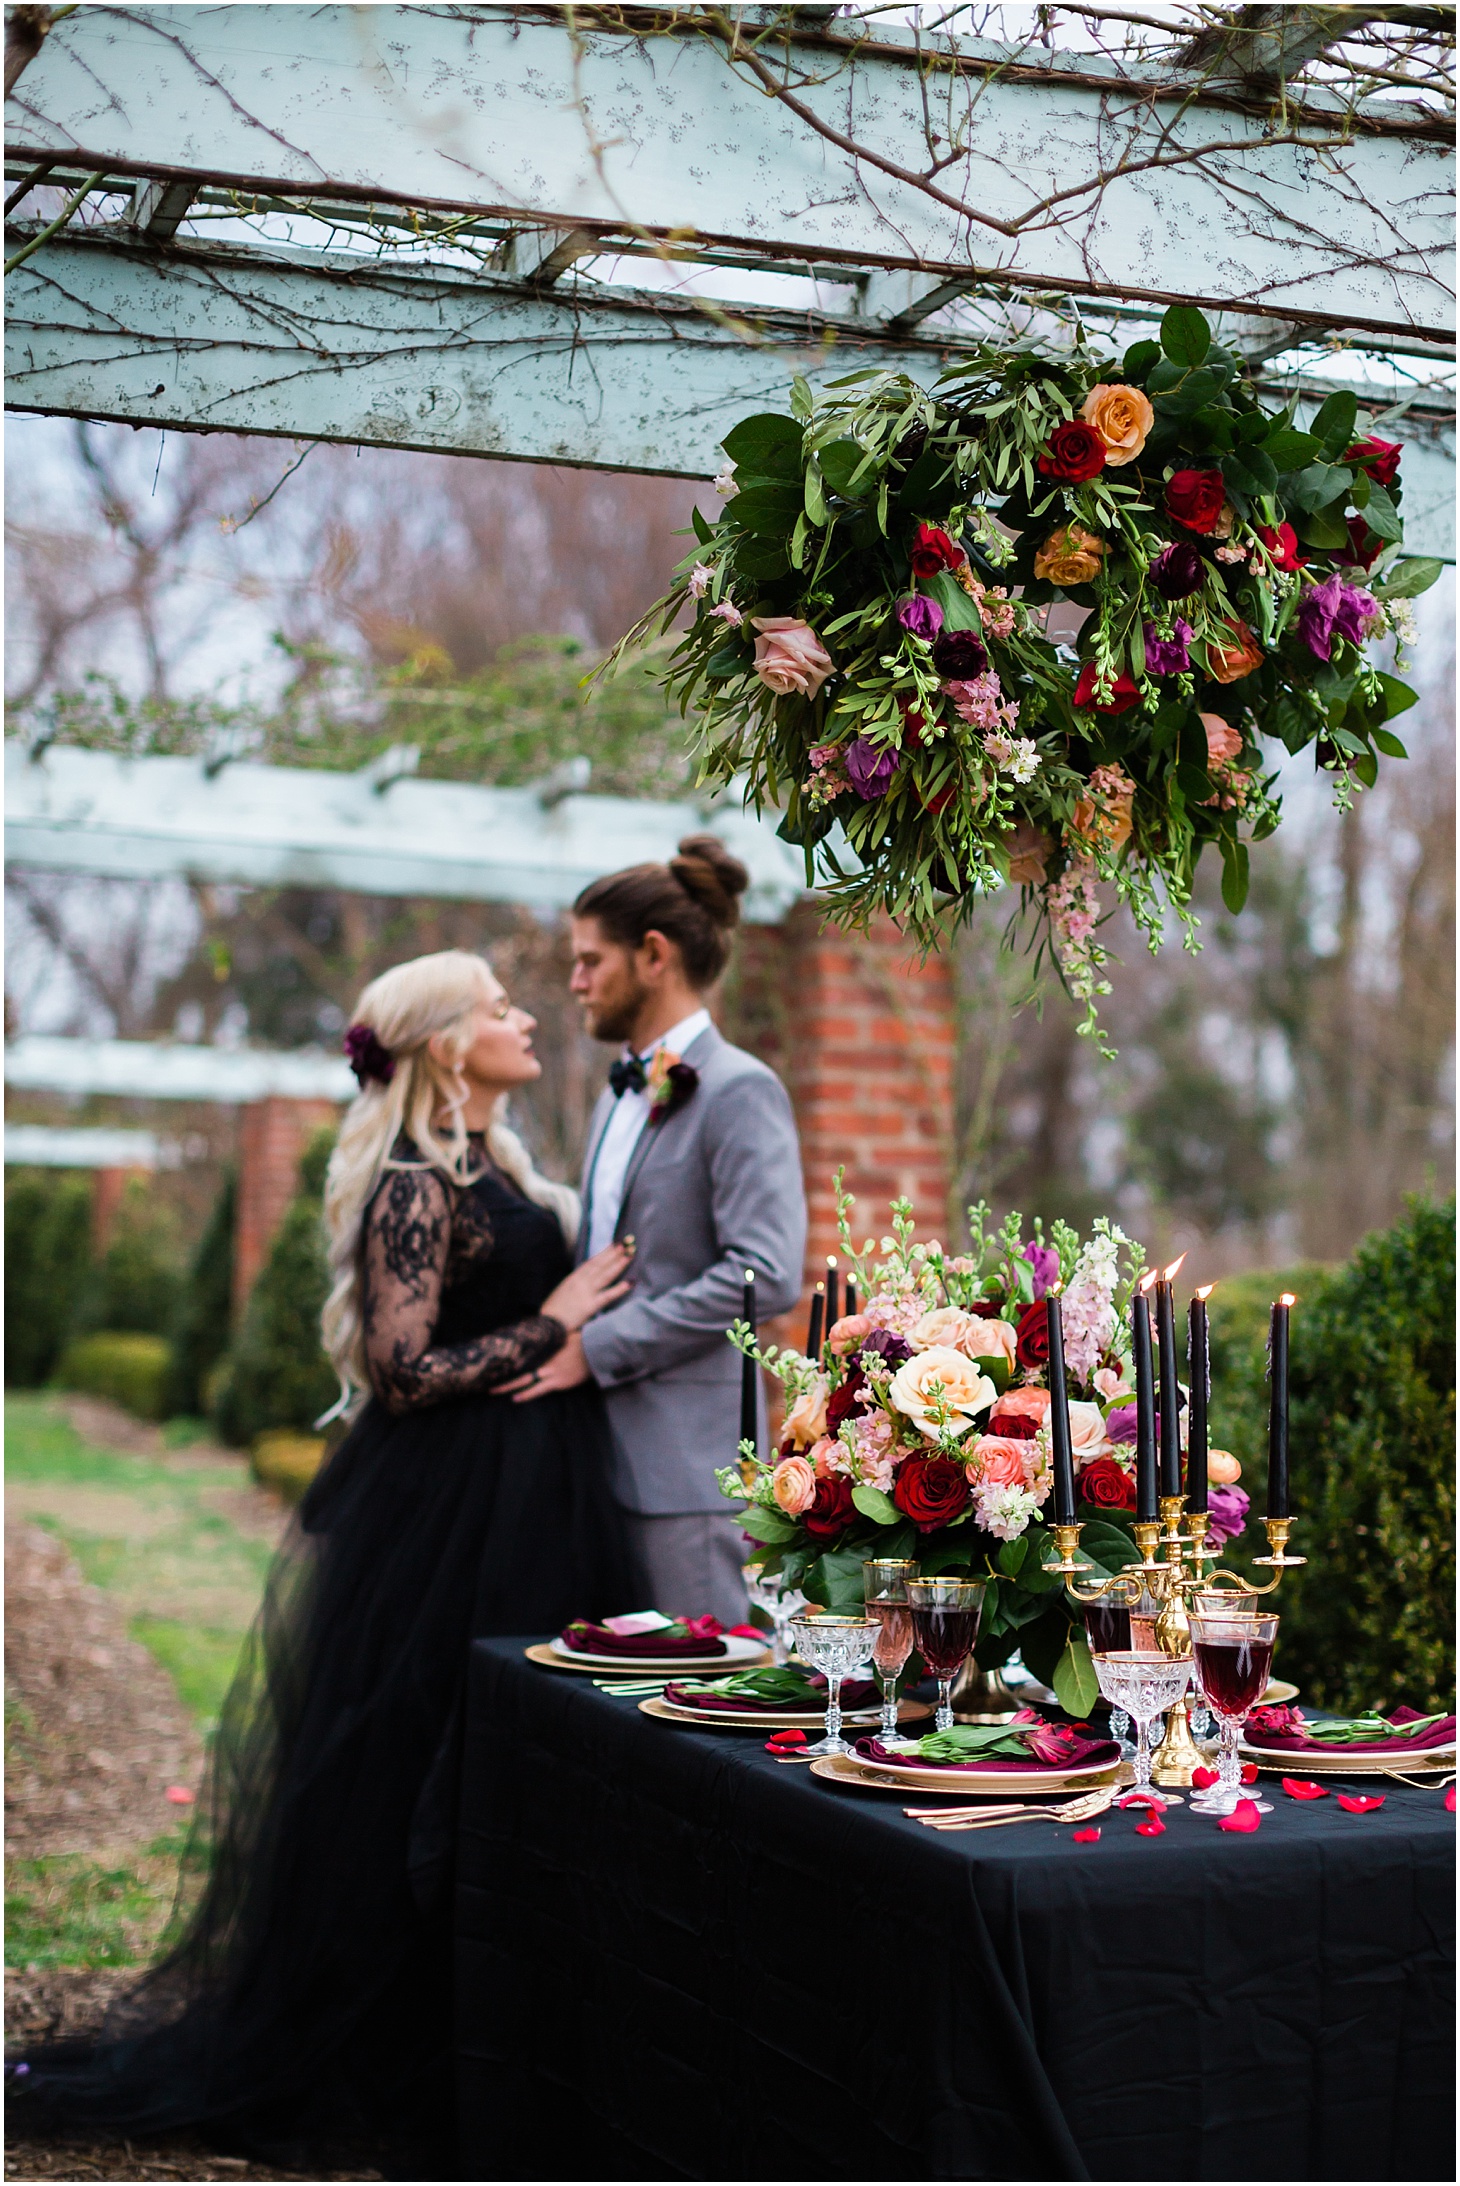 Wedding at River Farm in Alexandria, VA | Black and Red Gothic-Inspired Wedding Editorial | Sarah Bradshaw Photography